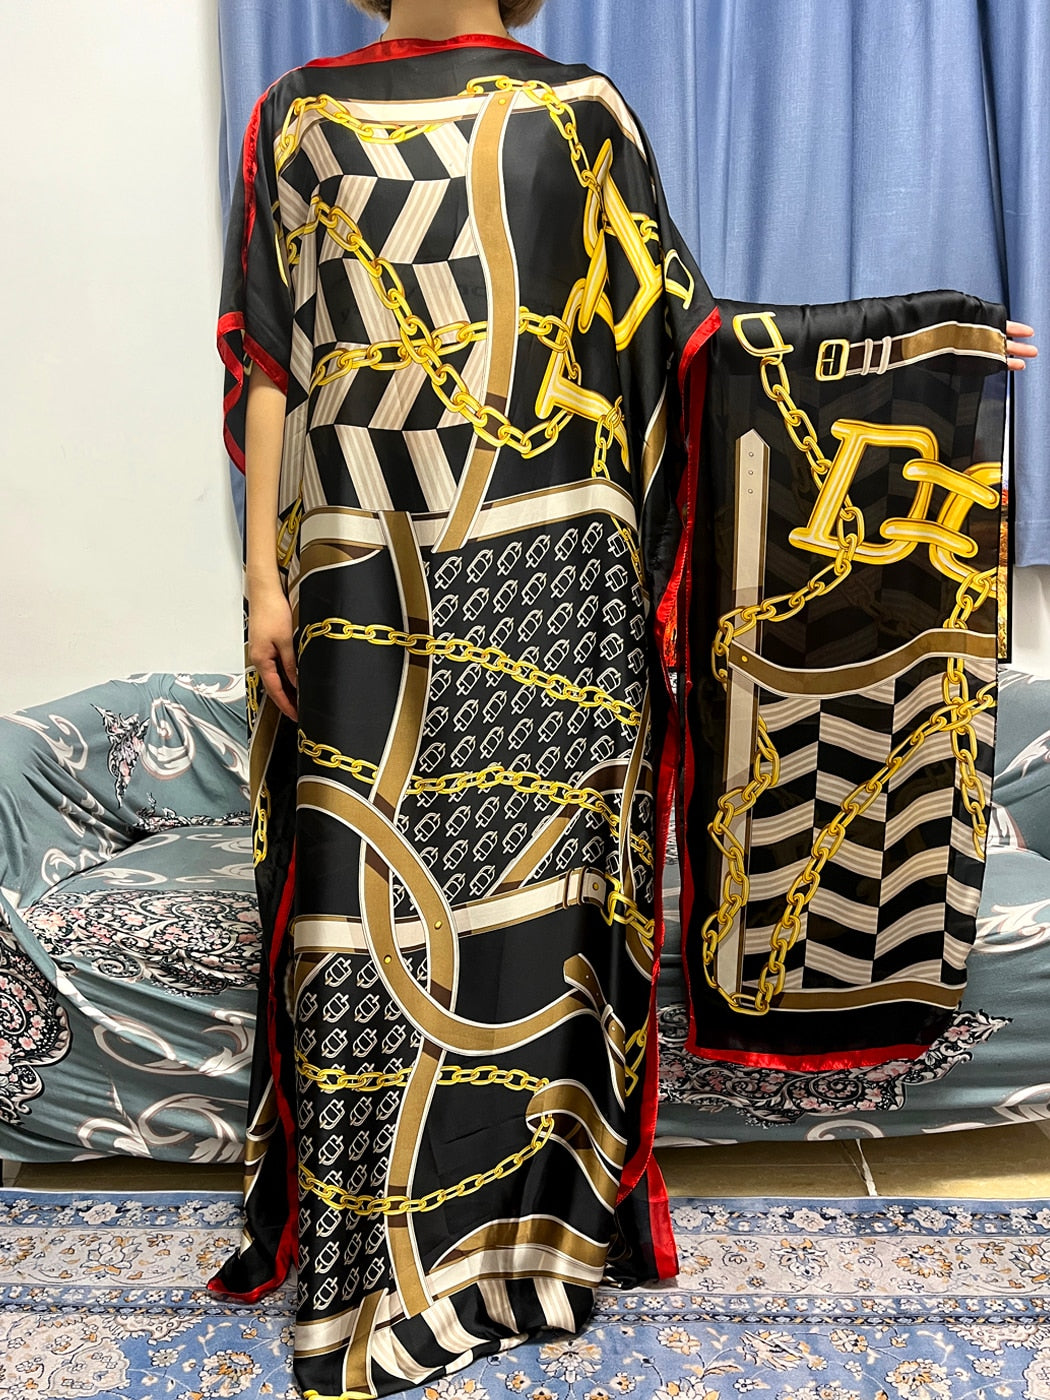 Stylish Muslim Abayas for Women: Elegant Summer Silk Collection with Headscarf - Flexi Africa - Flexi Africa offers Free Delivery Worldwide - Vibrant African traditional clothing showcasing bold prints and intricate designs